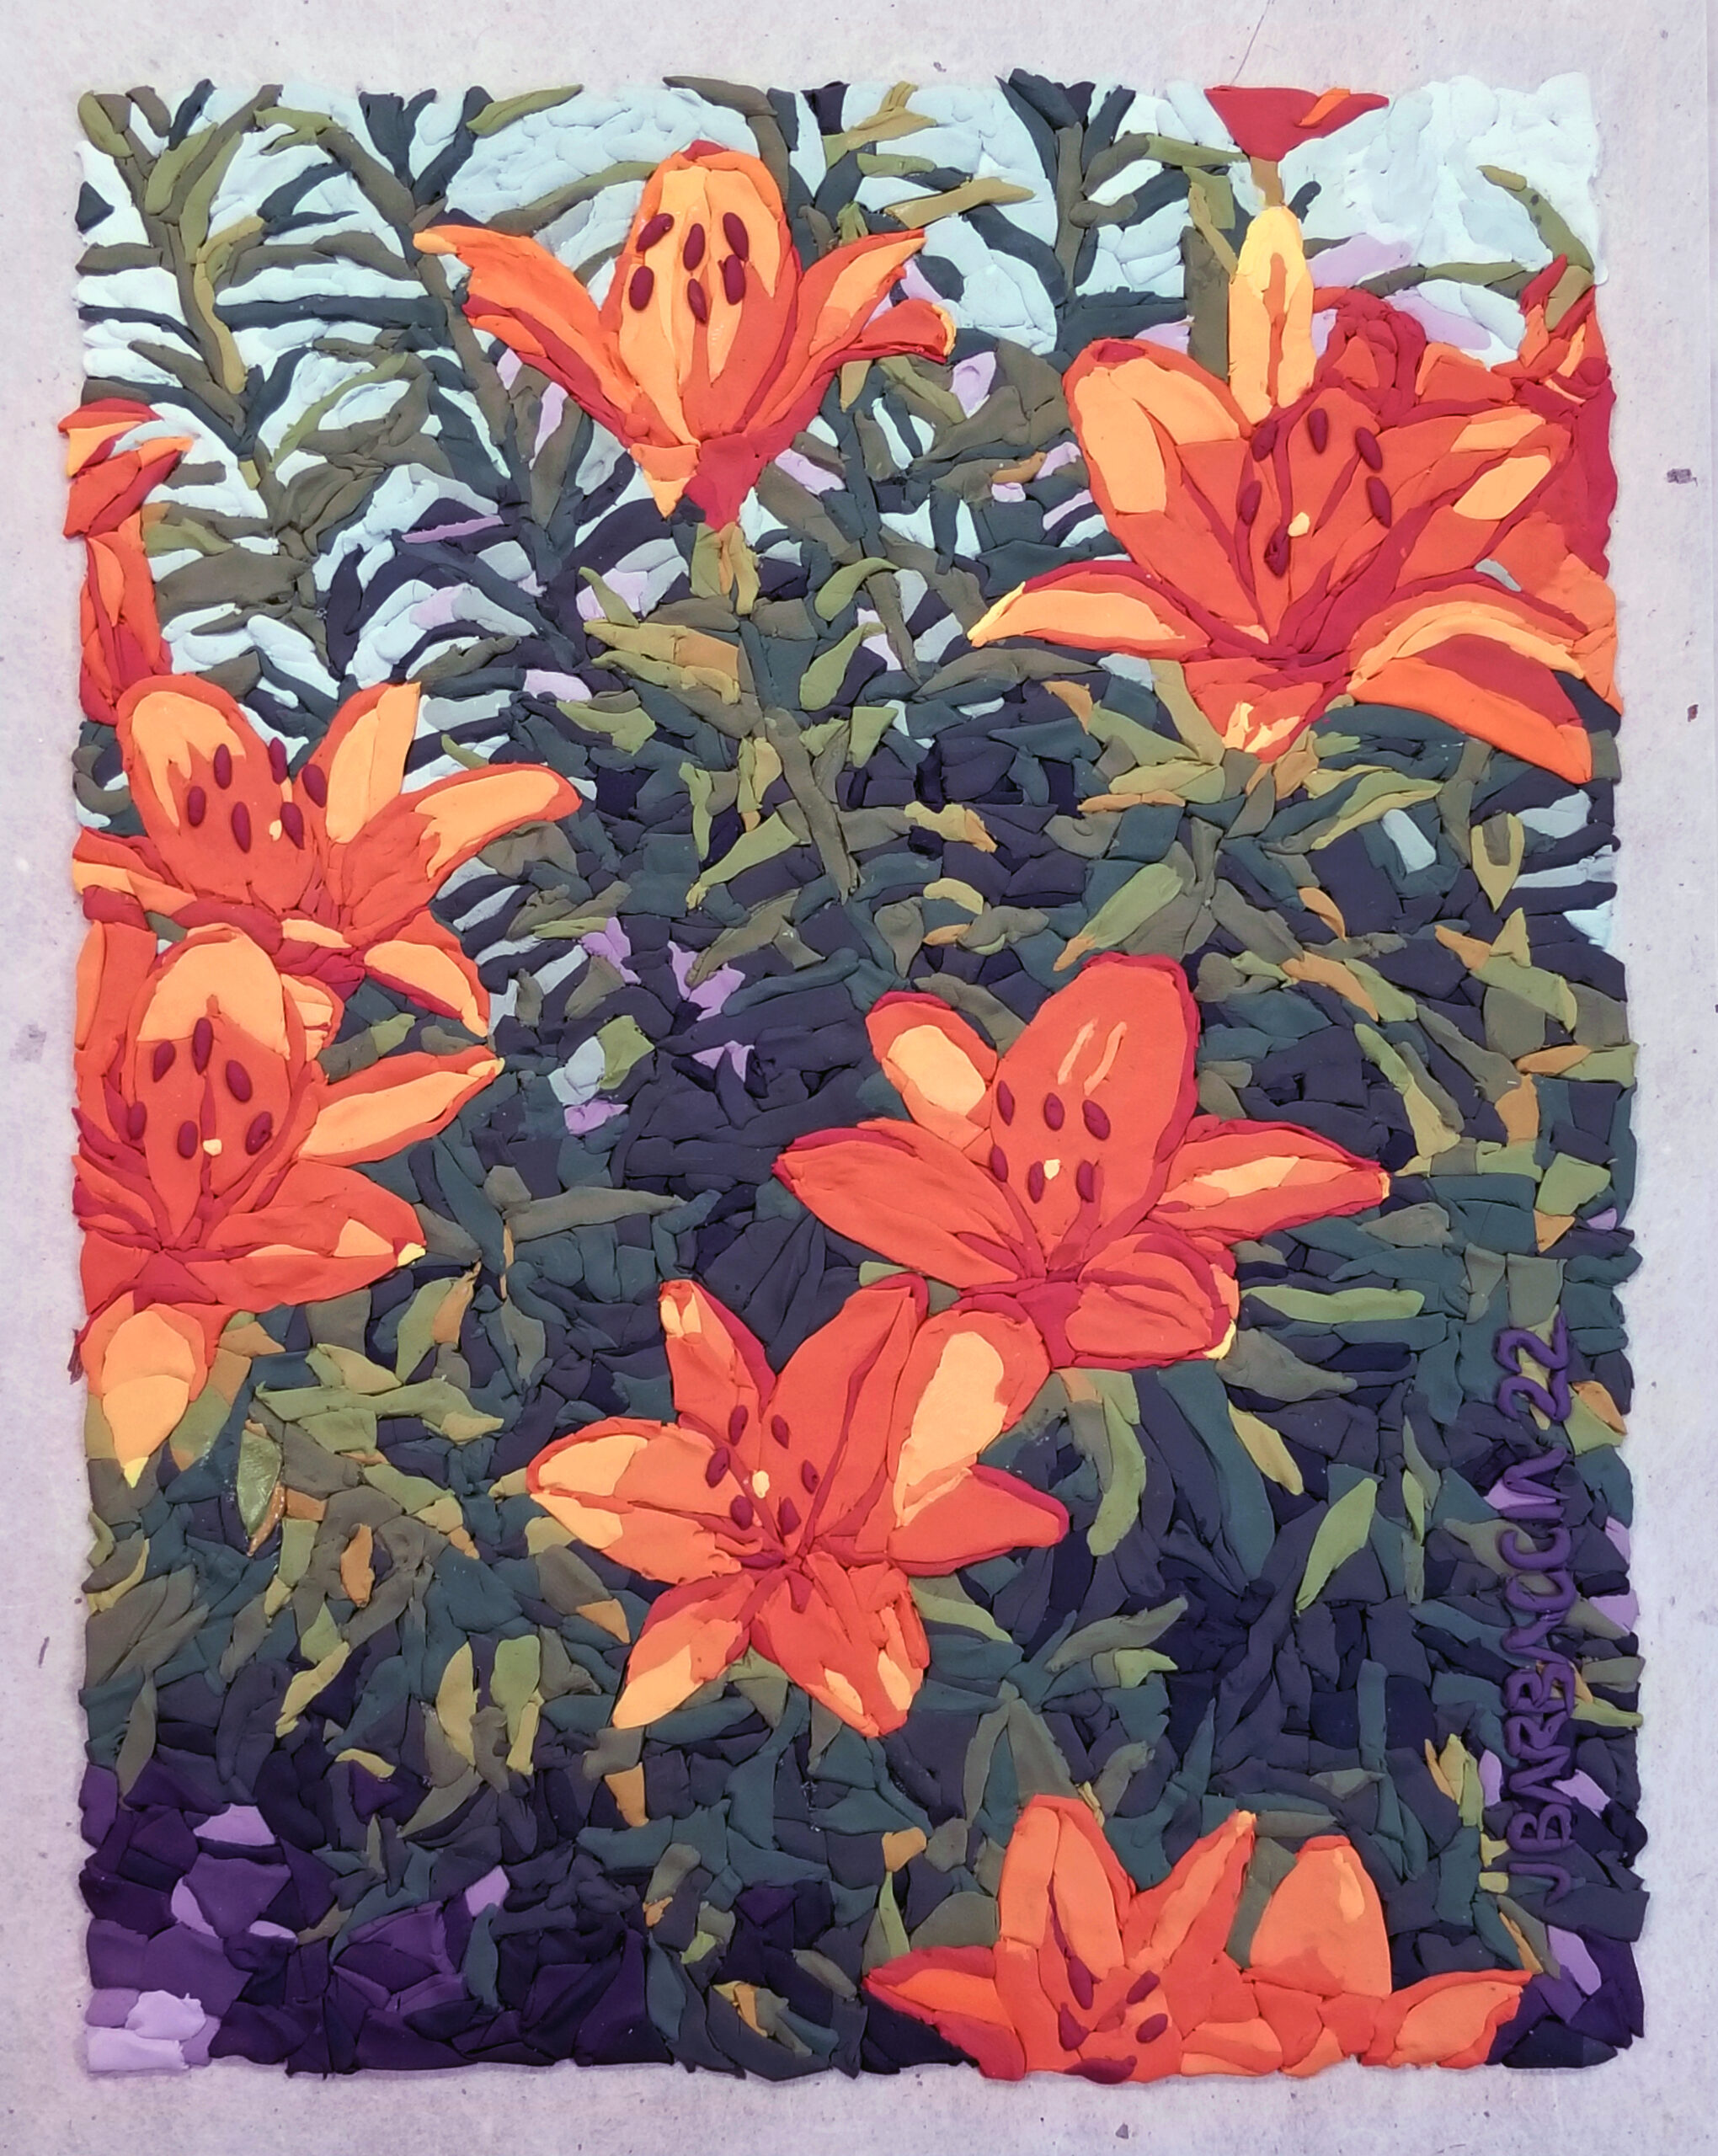 Day Lilies
Polymer clay on Japanese Rice paper
9″ x 7″
$400